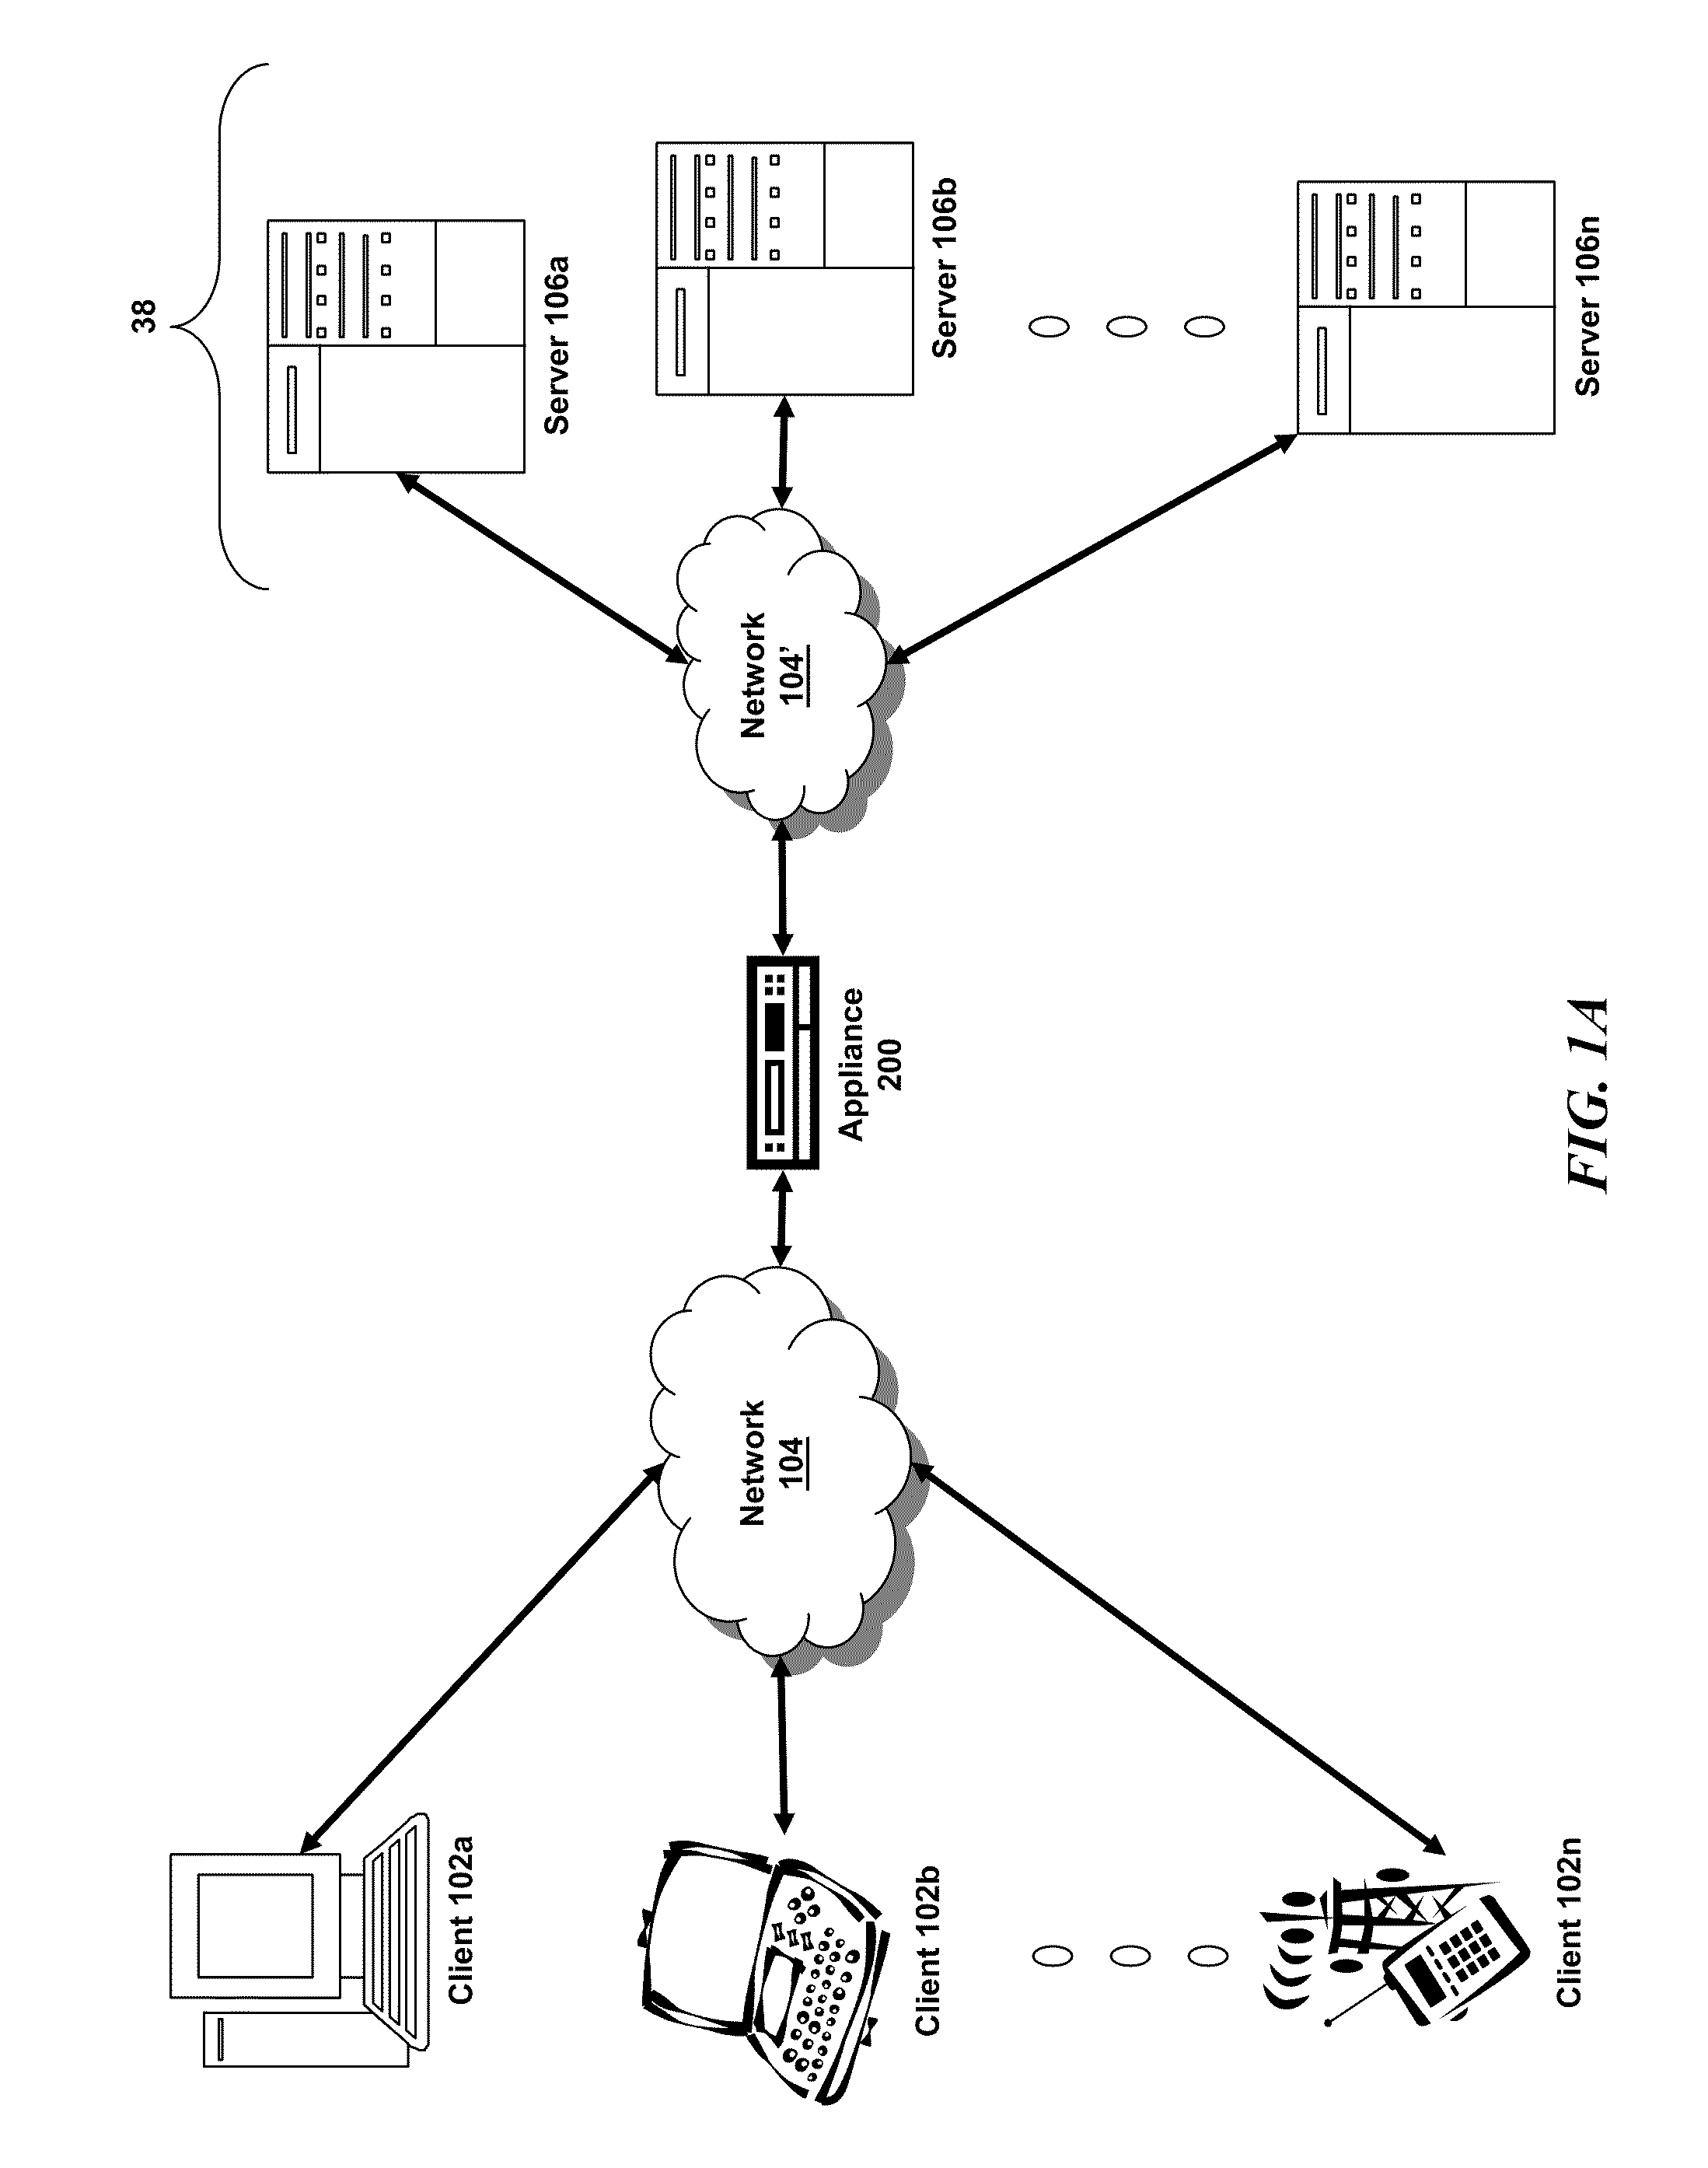 Systems and methods for mixed mode handling of IPv6 and IPv4 traffic by a virtual server